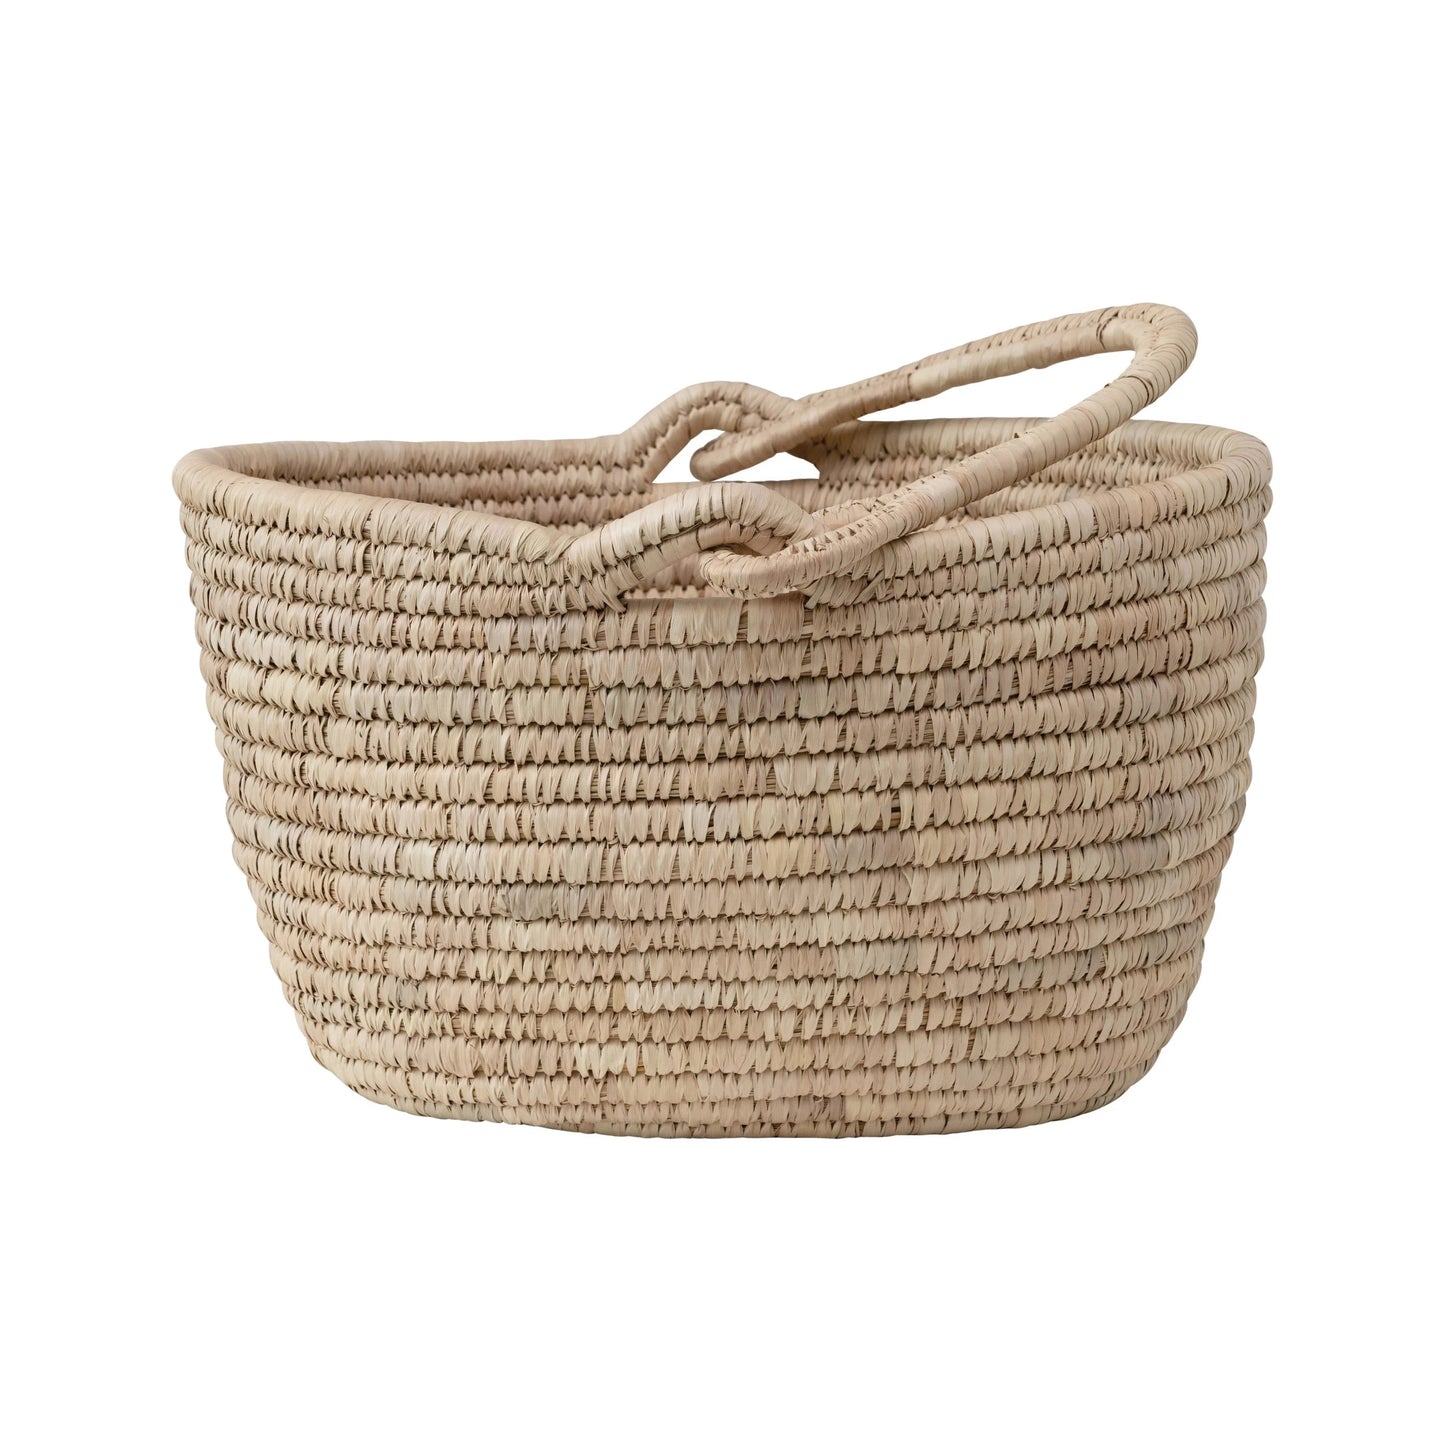 Naples Woven Basket with Handle